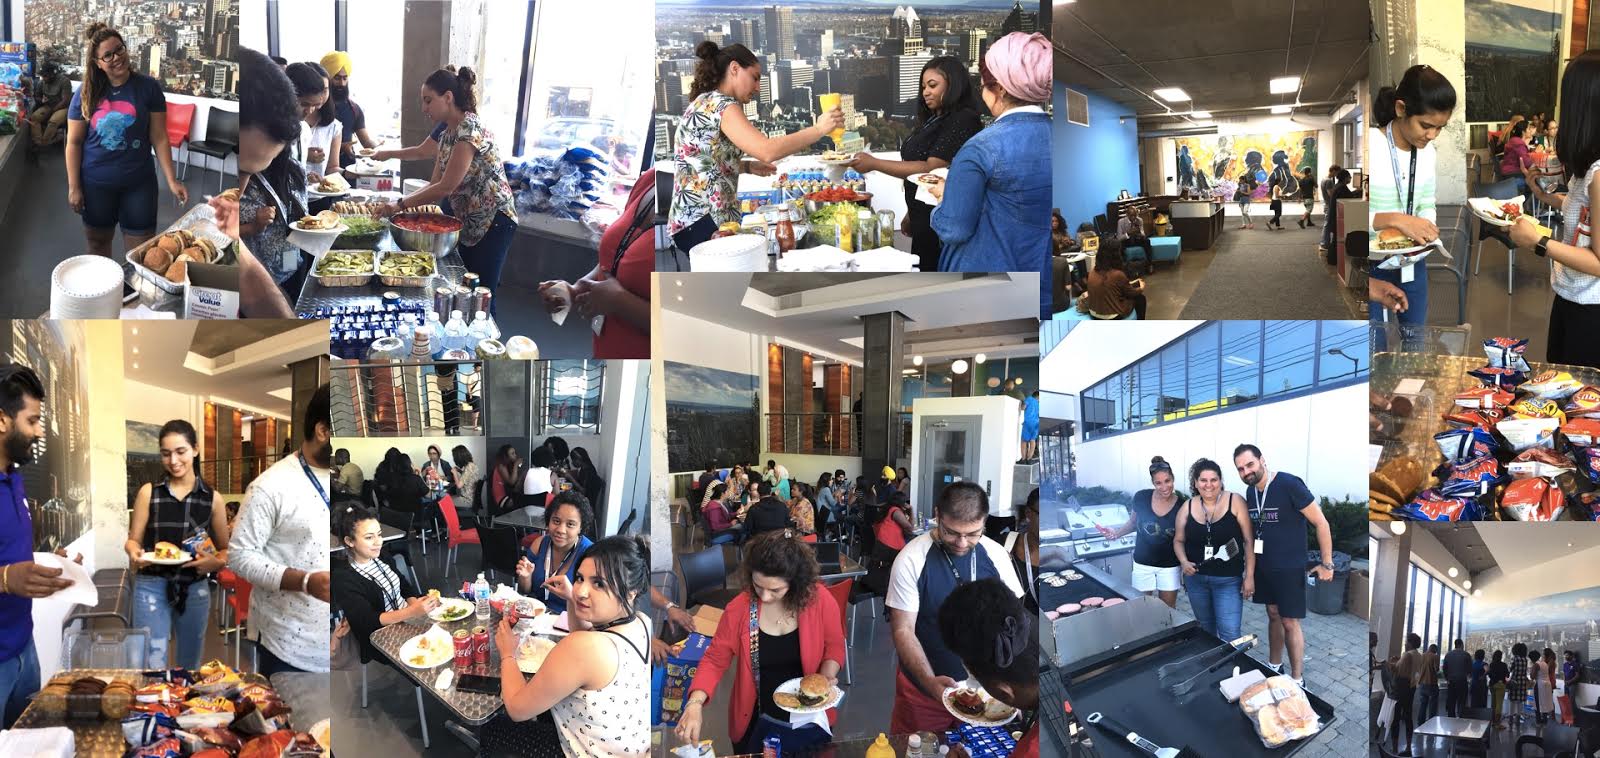 From Great to Amazing: Our first summer BBQ Open House was a sizzling smash hit!